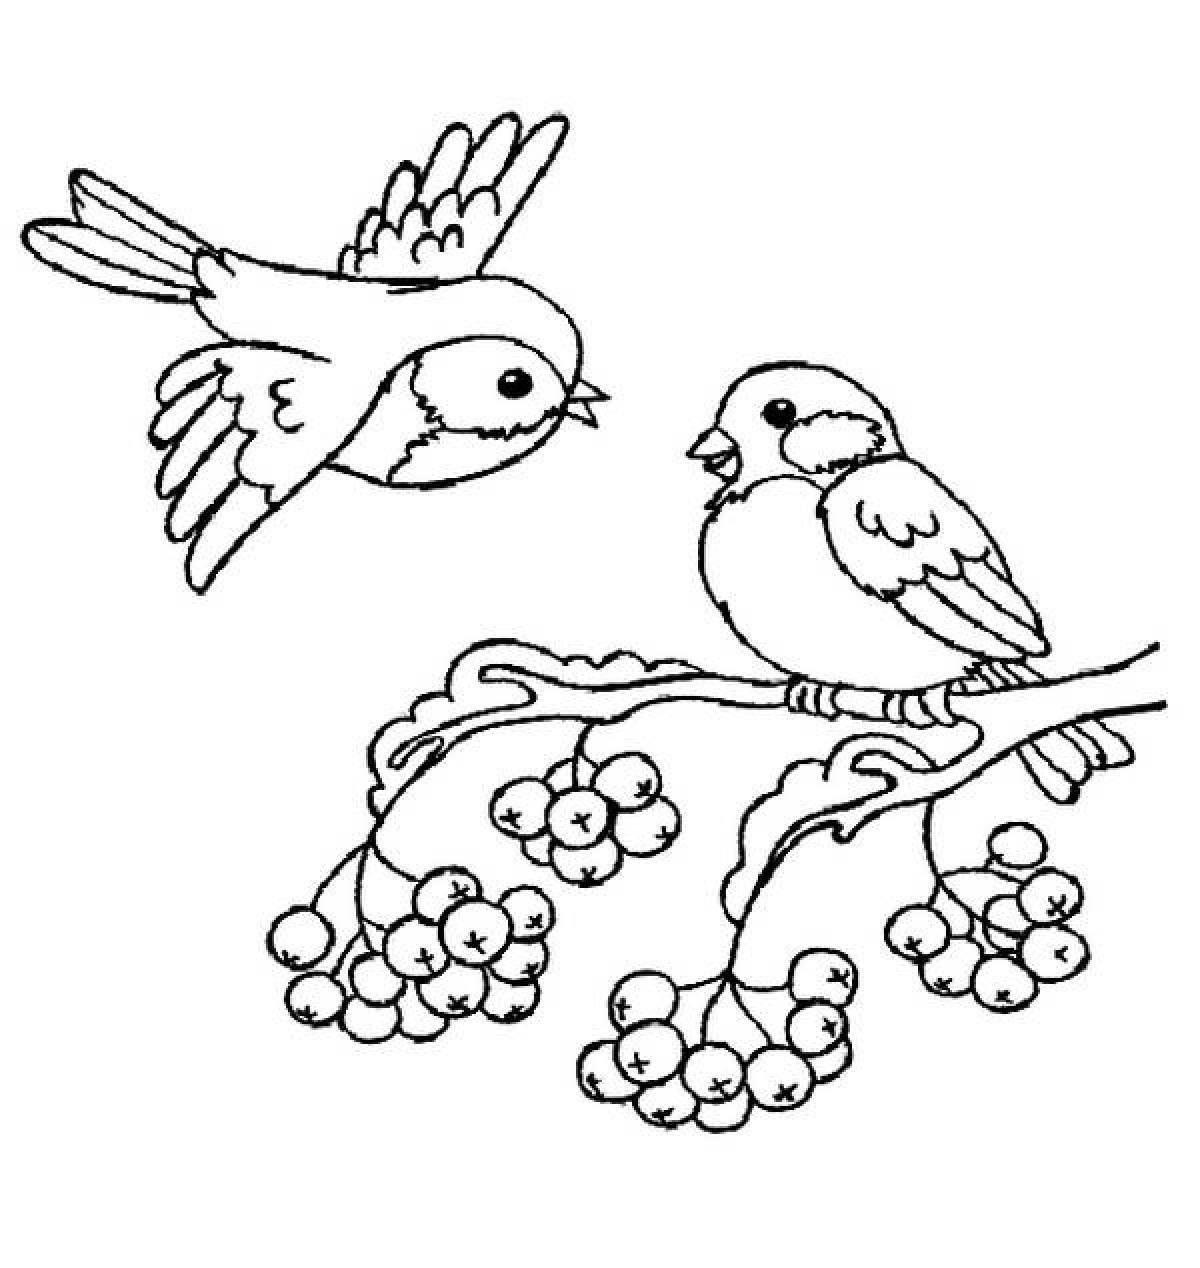 Coloring book cute wintering birds for 6-7 year olds